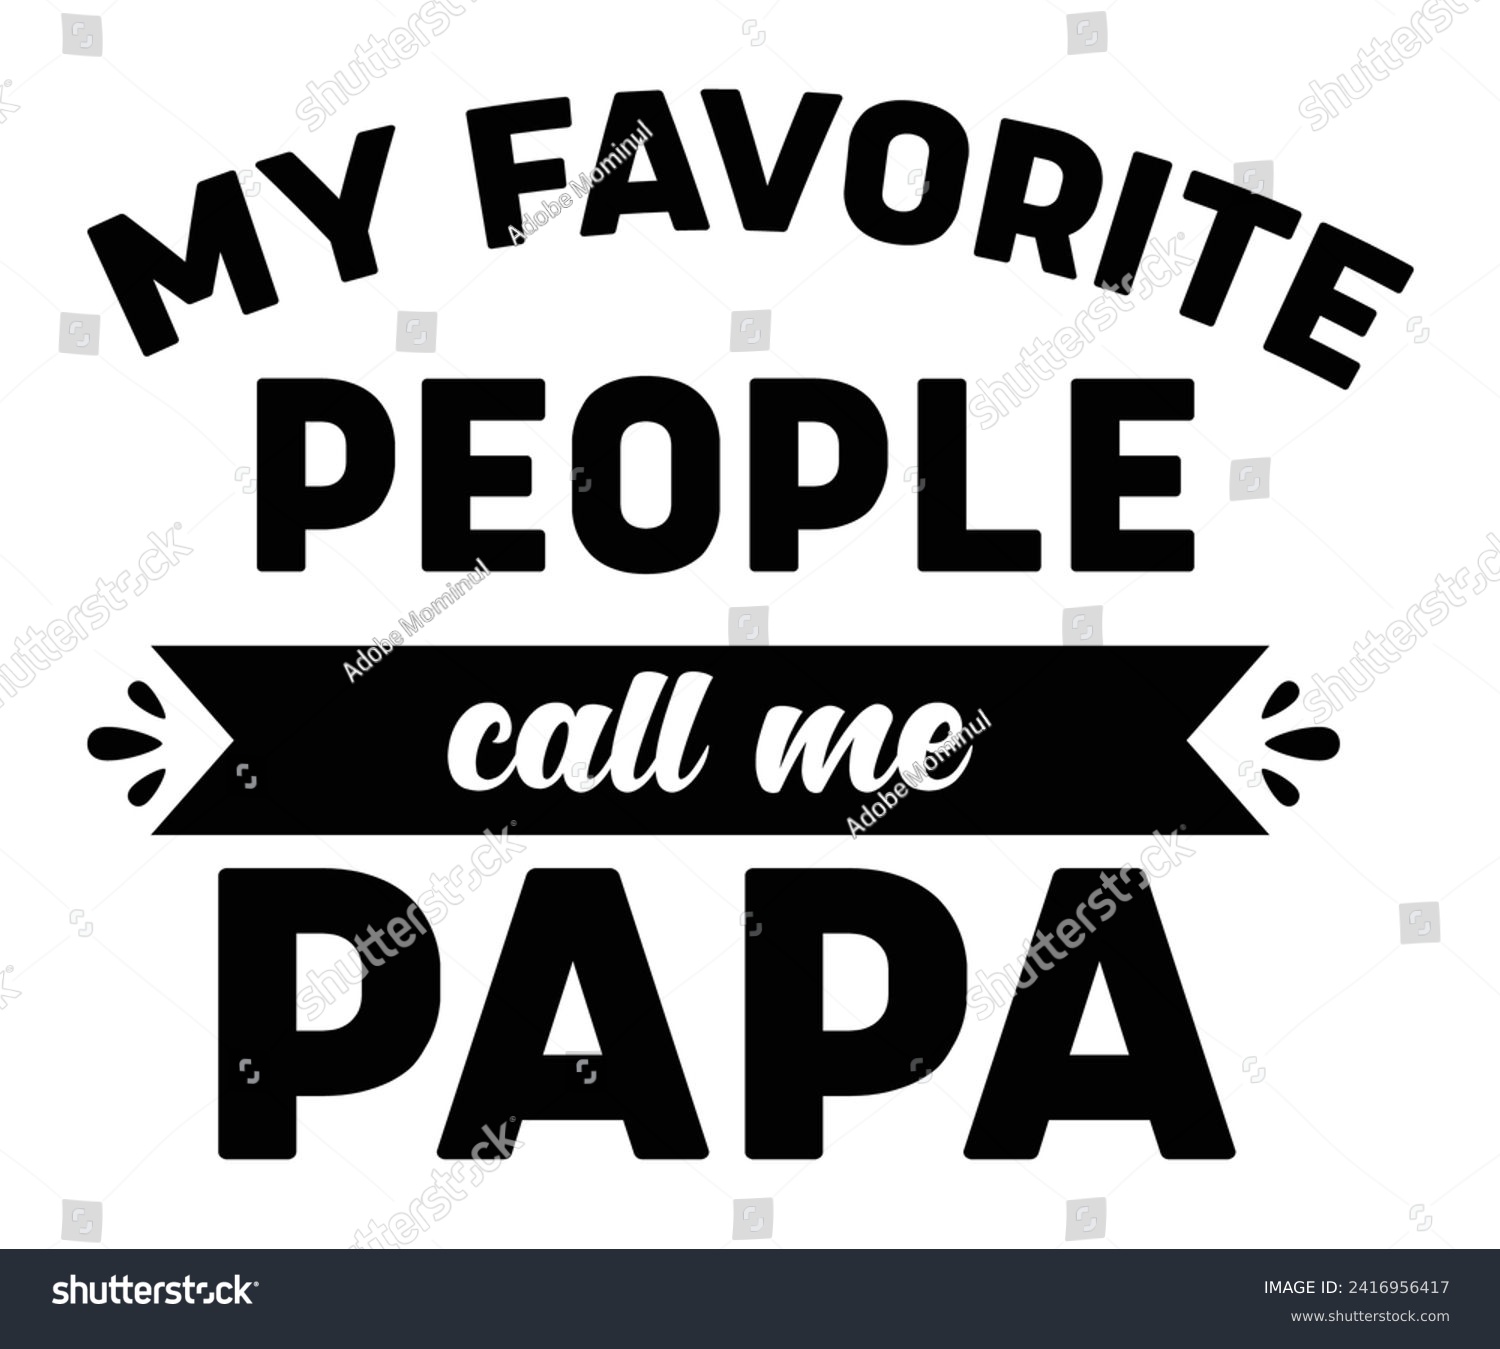 SVG of My Favorite People Call Me Papa Svg,Father's Day Svg,Papa svg,Grandpa Svg,Father's Day Saying Qoutes,Dad Svg,Funny Father, Gift For Dad Svg,Daddy Svg,Family Svg,T shirt Design,Svg Cut File,Typography svg